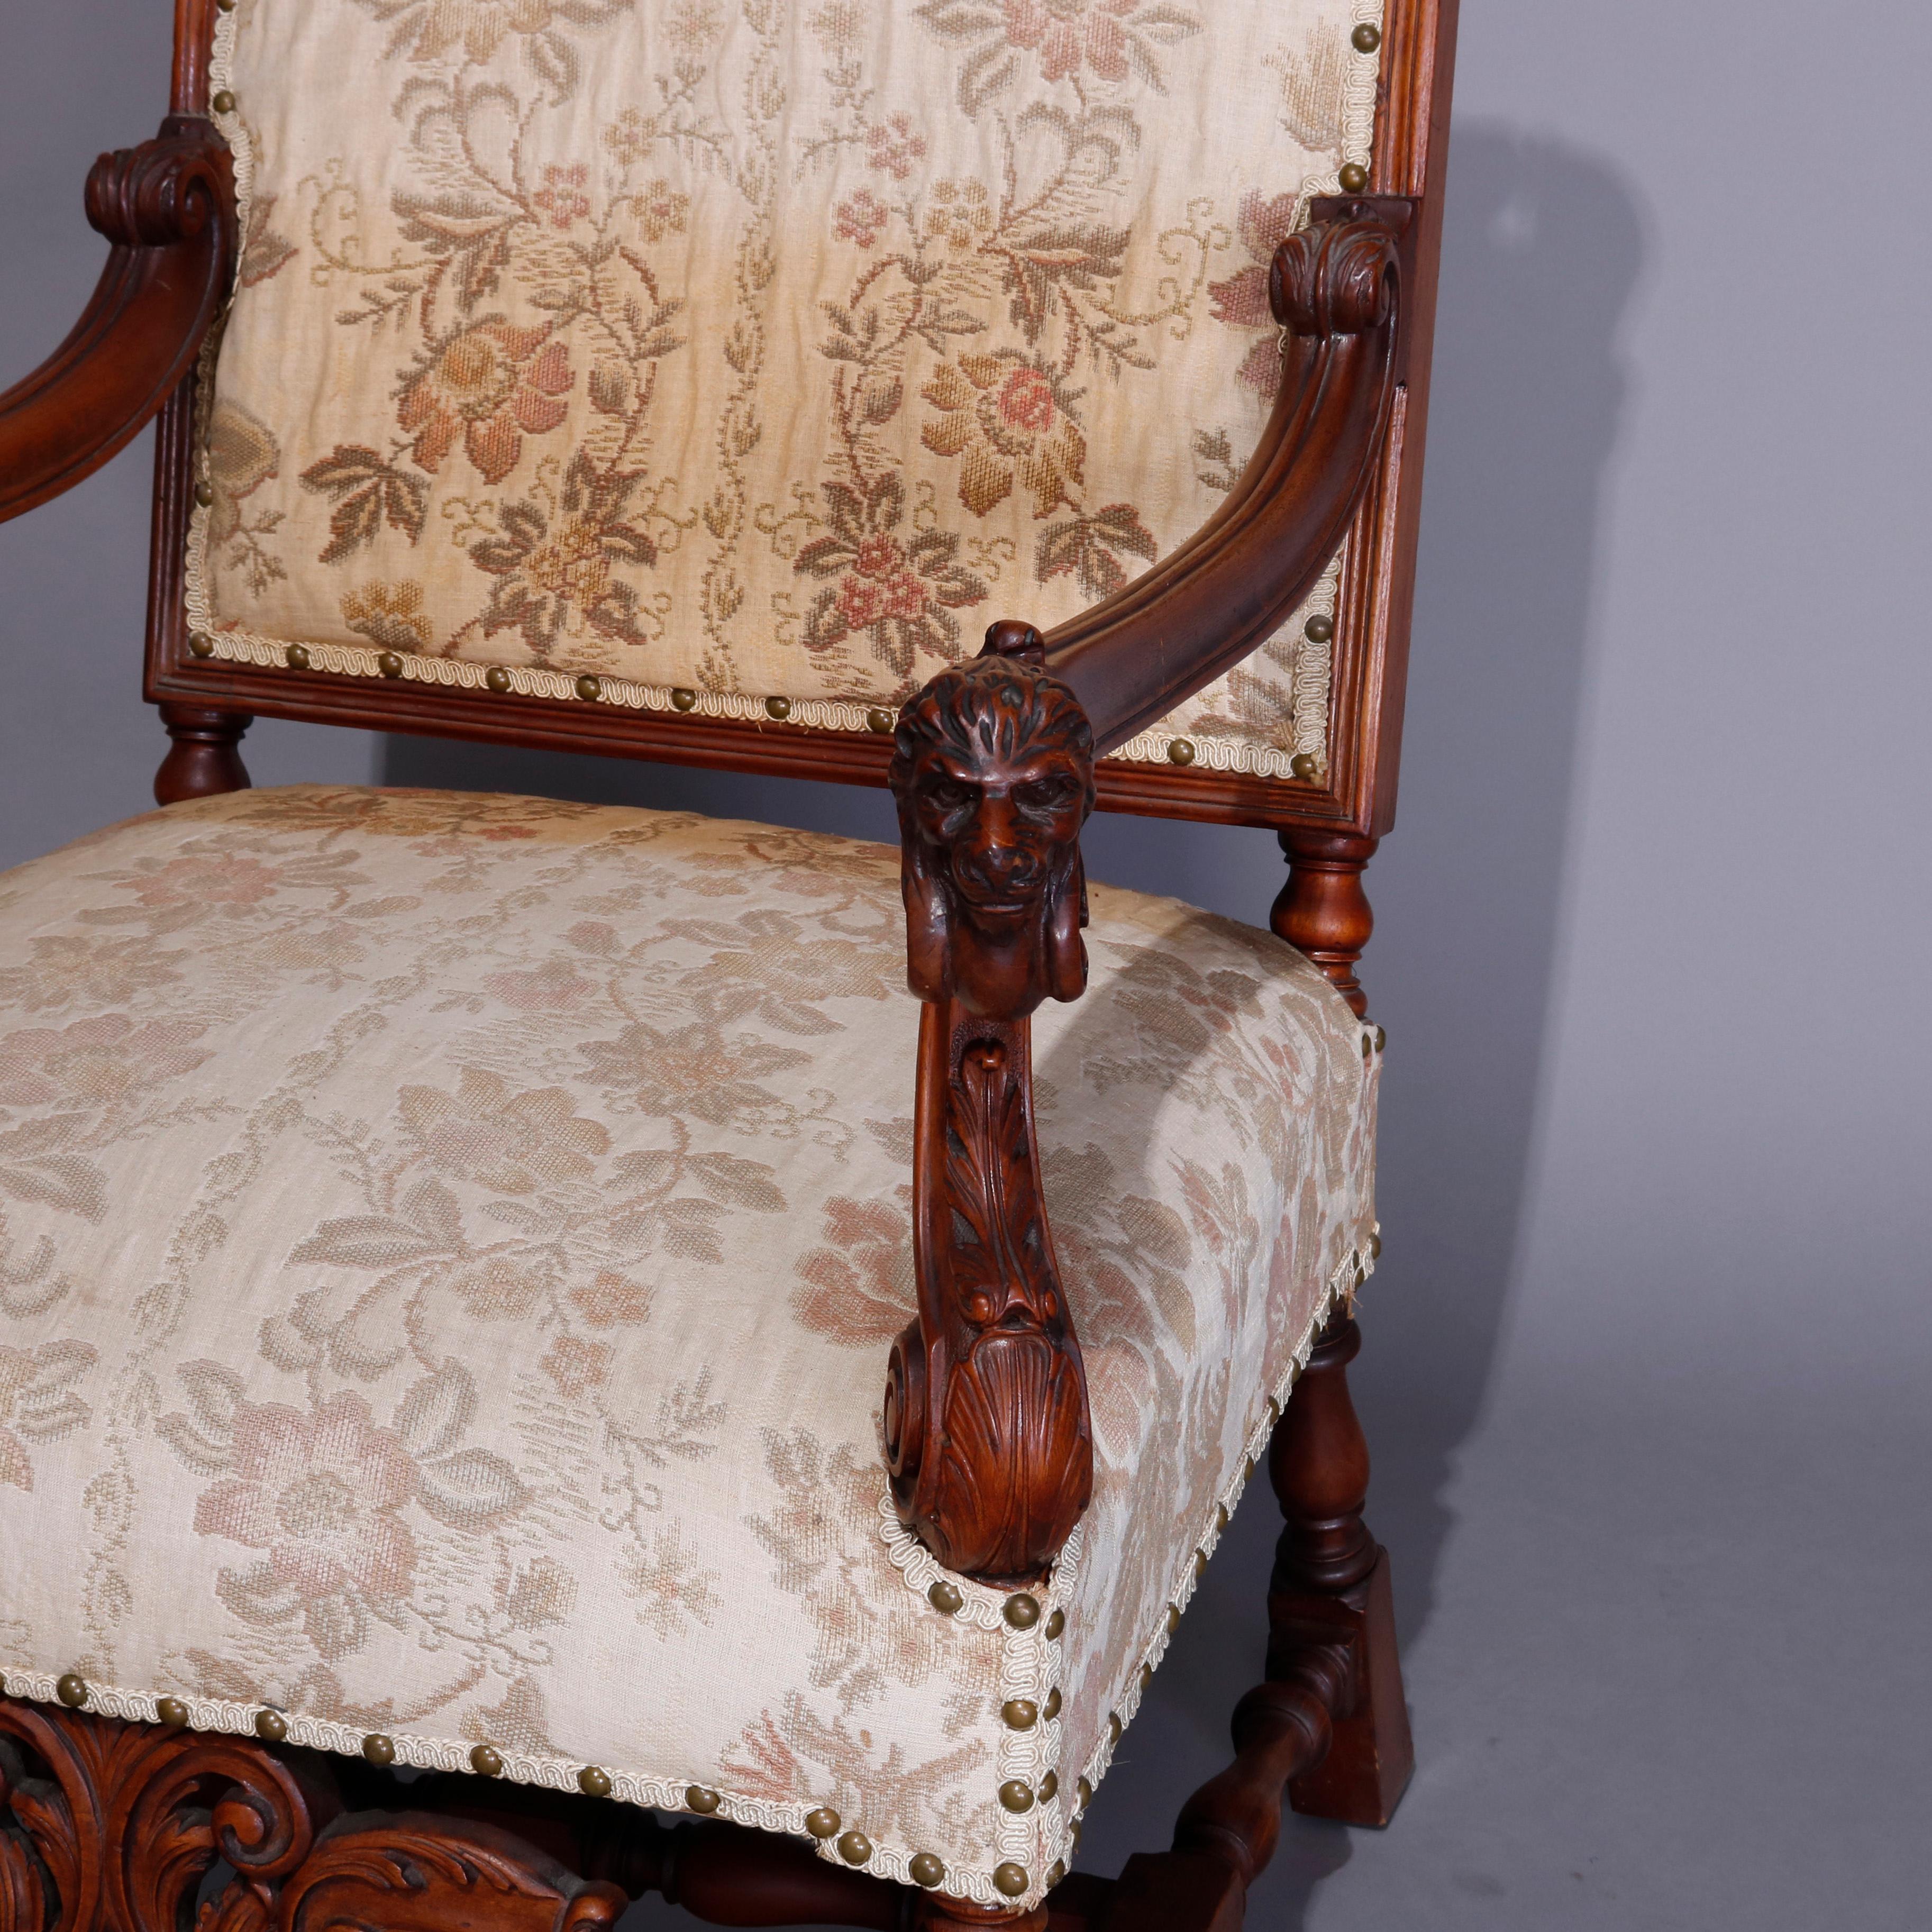 Carved Antique Victorian Baroque Style Figural Throne Armchair, circa 1900